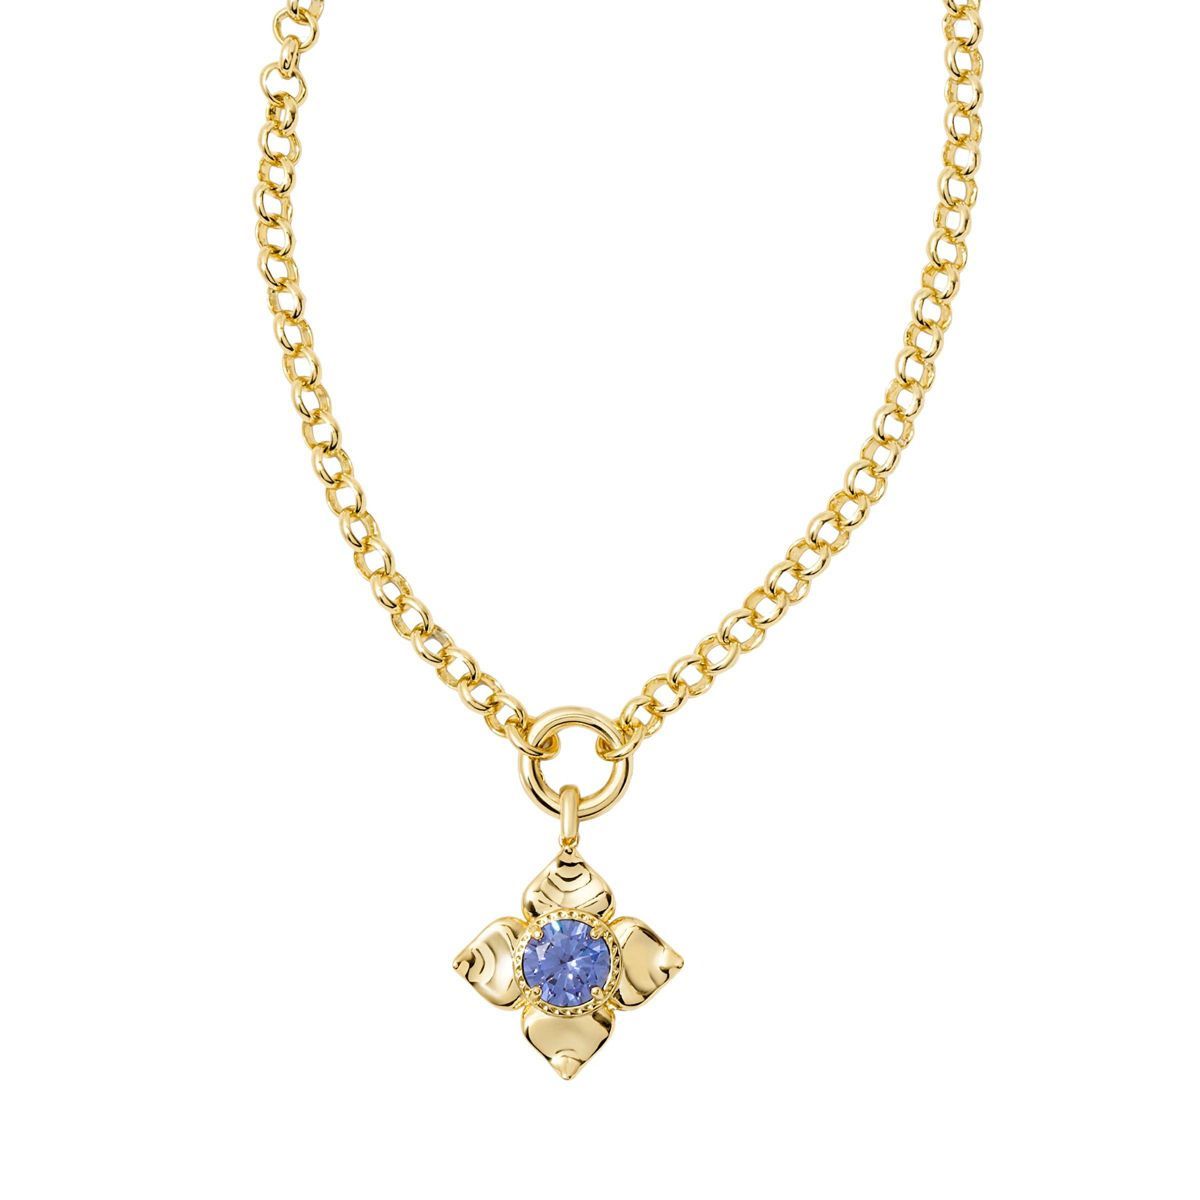 Kendra Scott Lily 14K Gold Over Brass Chain Pendant Necklace - Blue | Target